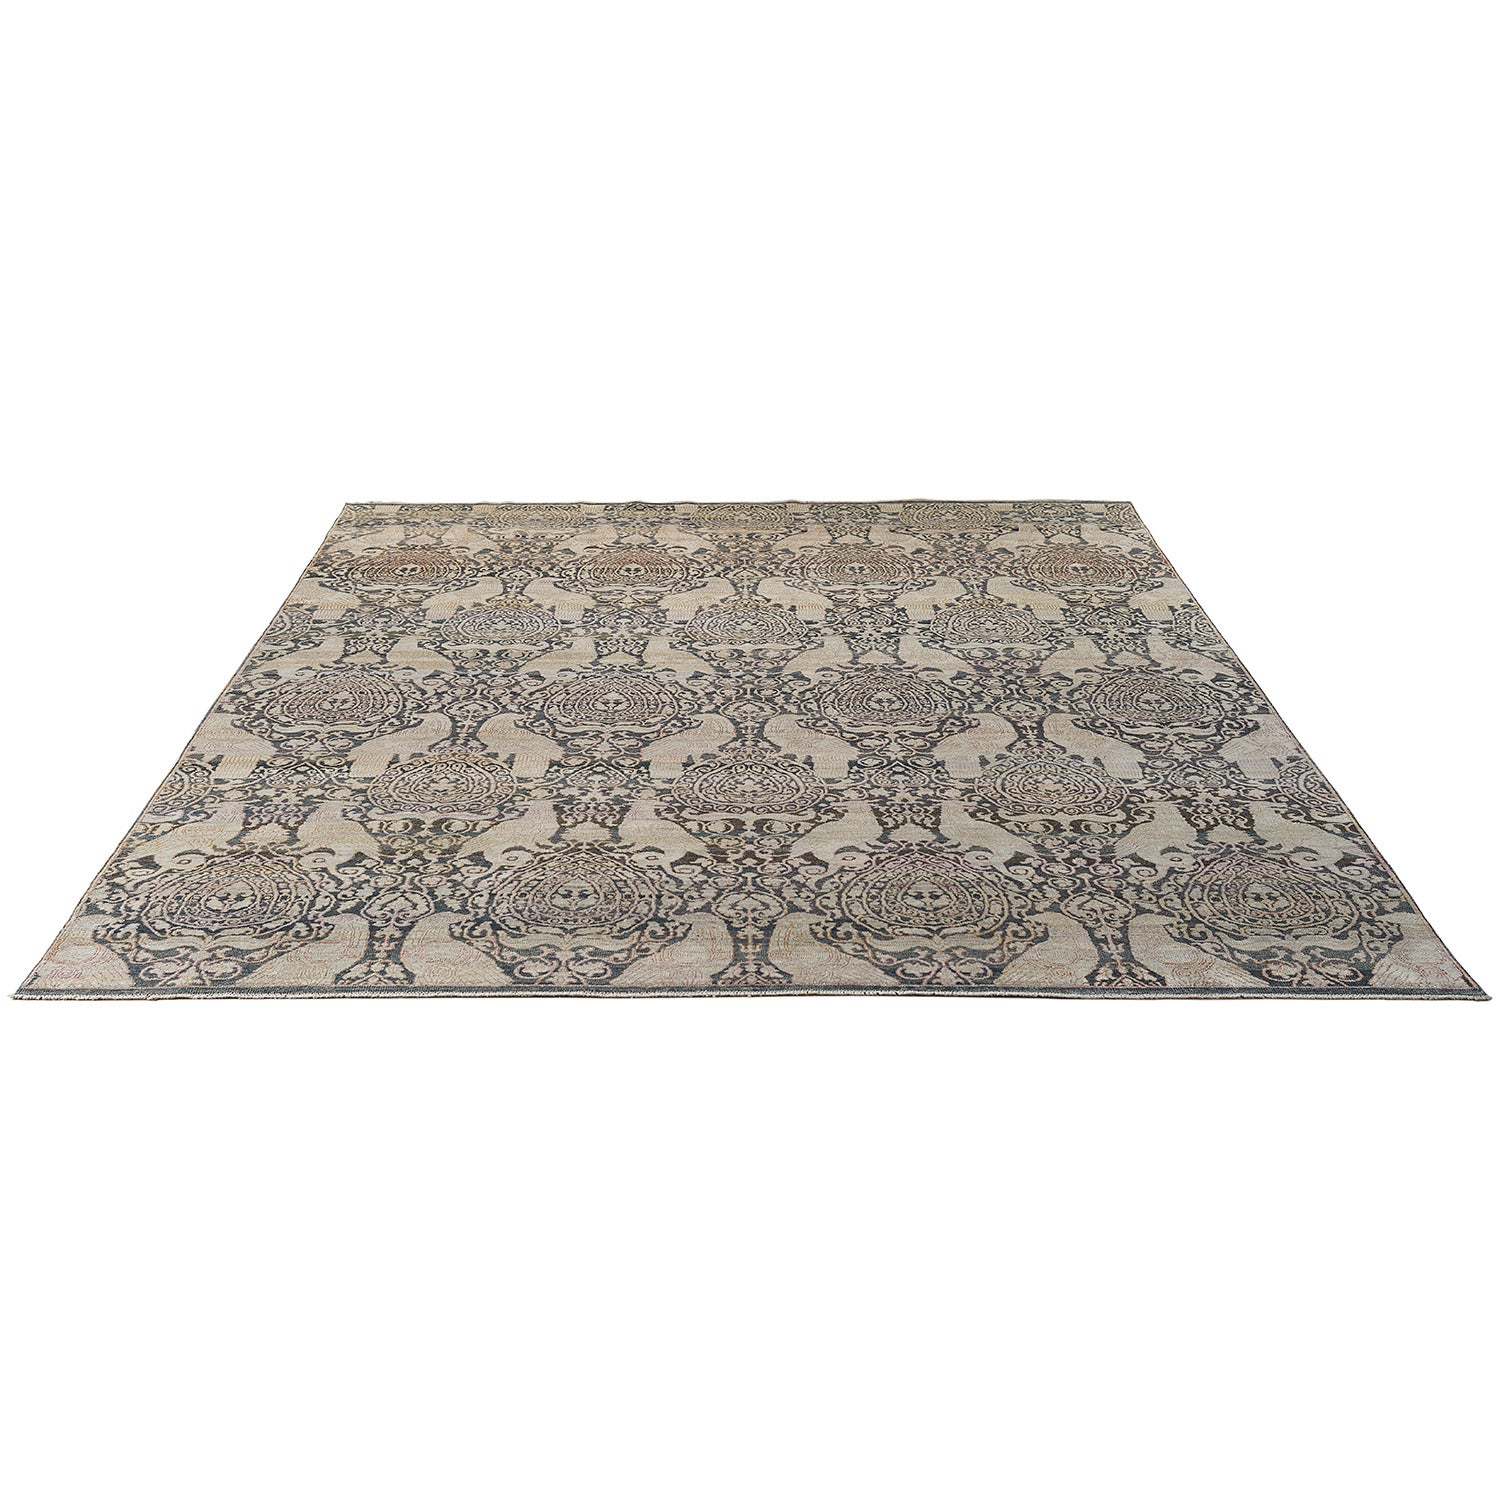 Elaborate symmetrical patterned rug with muted colors and solid border.